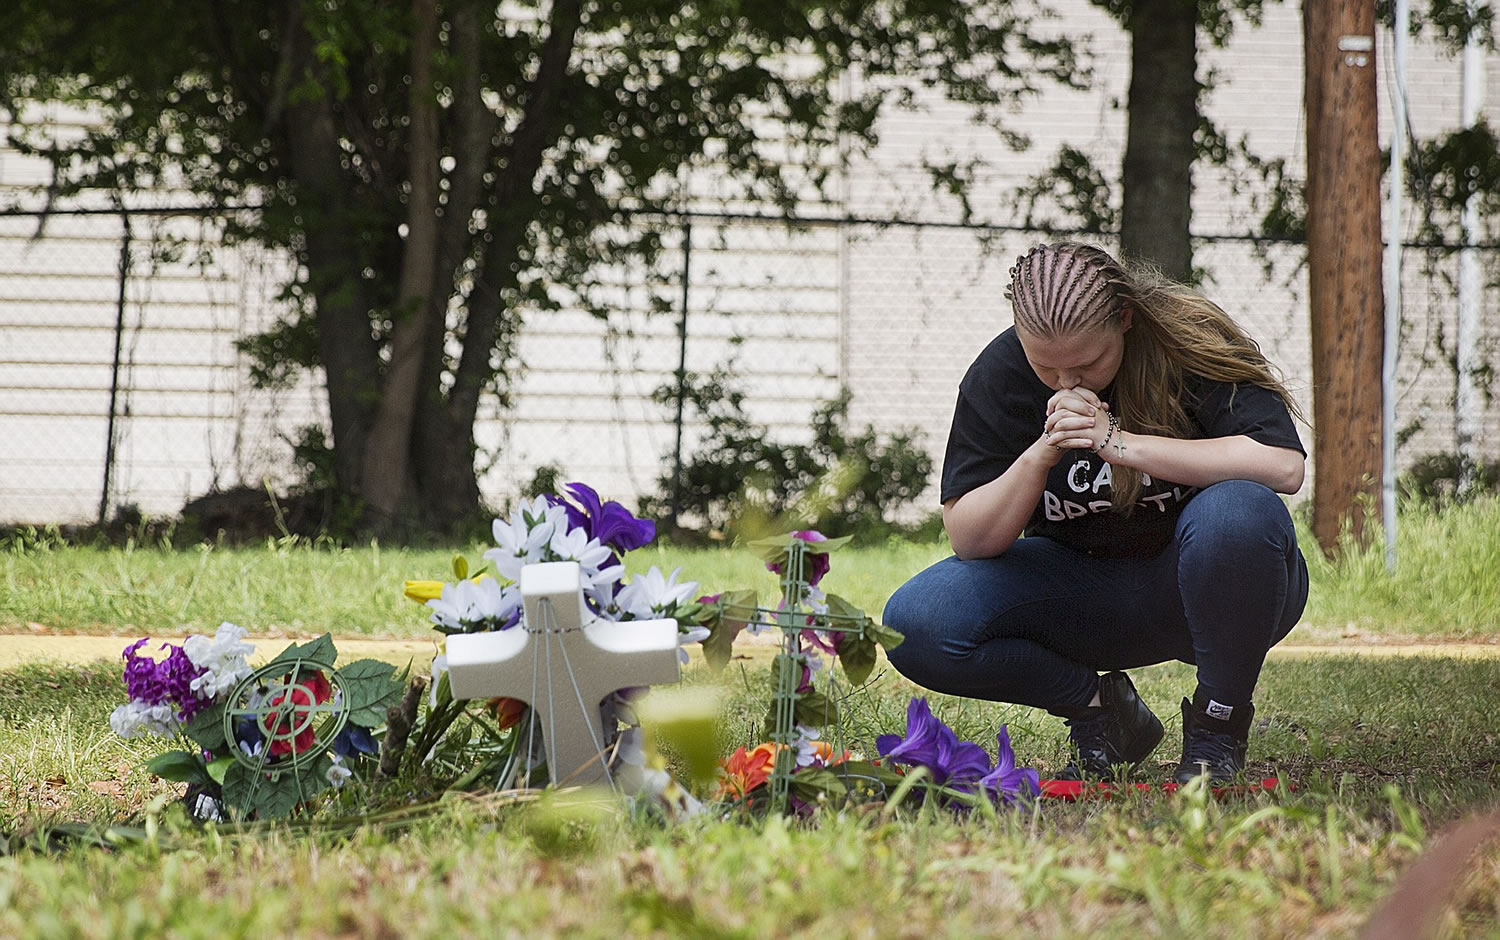 Asia Cromwell of Charleston S.C., visits a makeshift memorial at the scene where Walter Scott was killed by a North Charleston police officer Saturday after a traffic stop in North Charleston, S.C., on Friday.